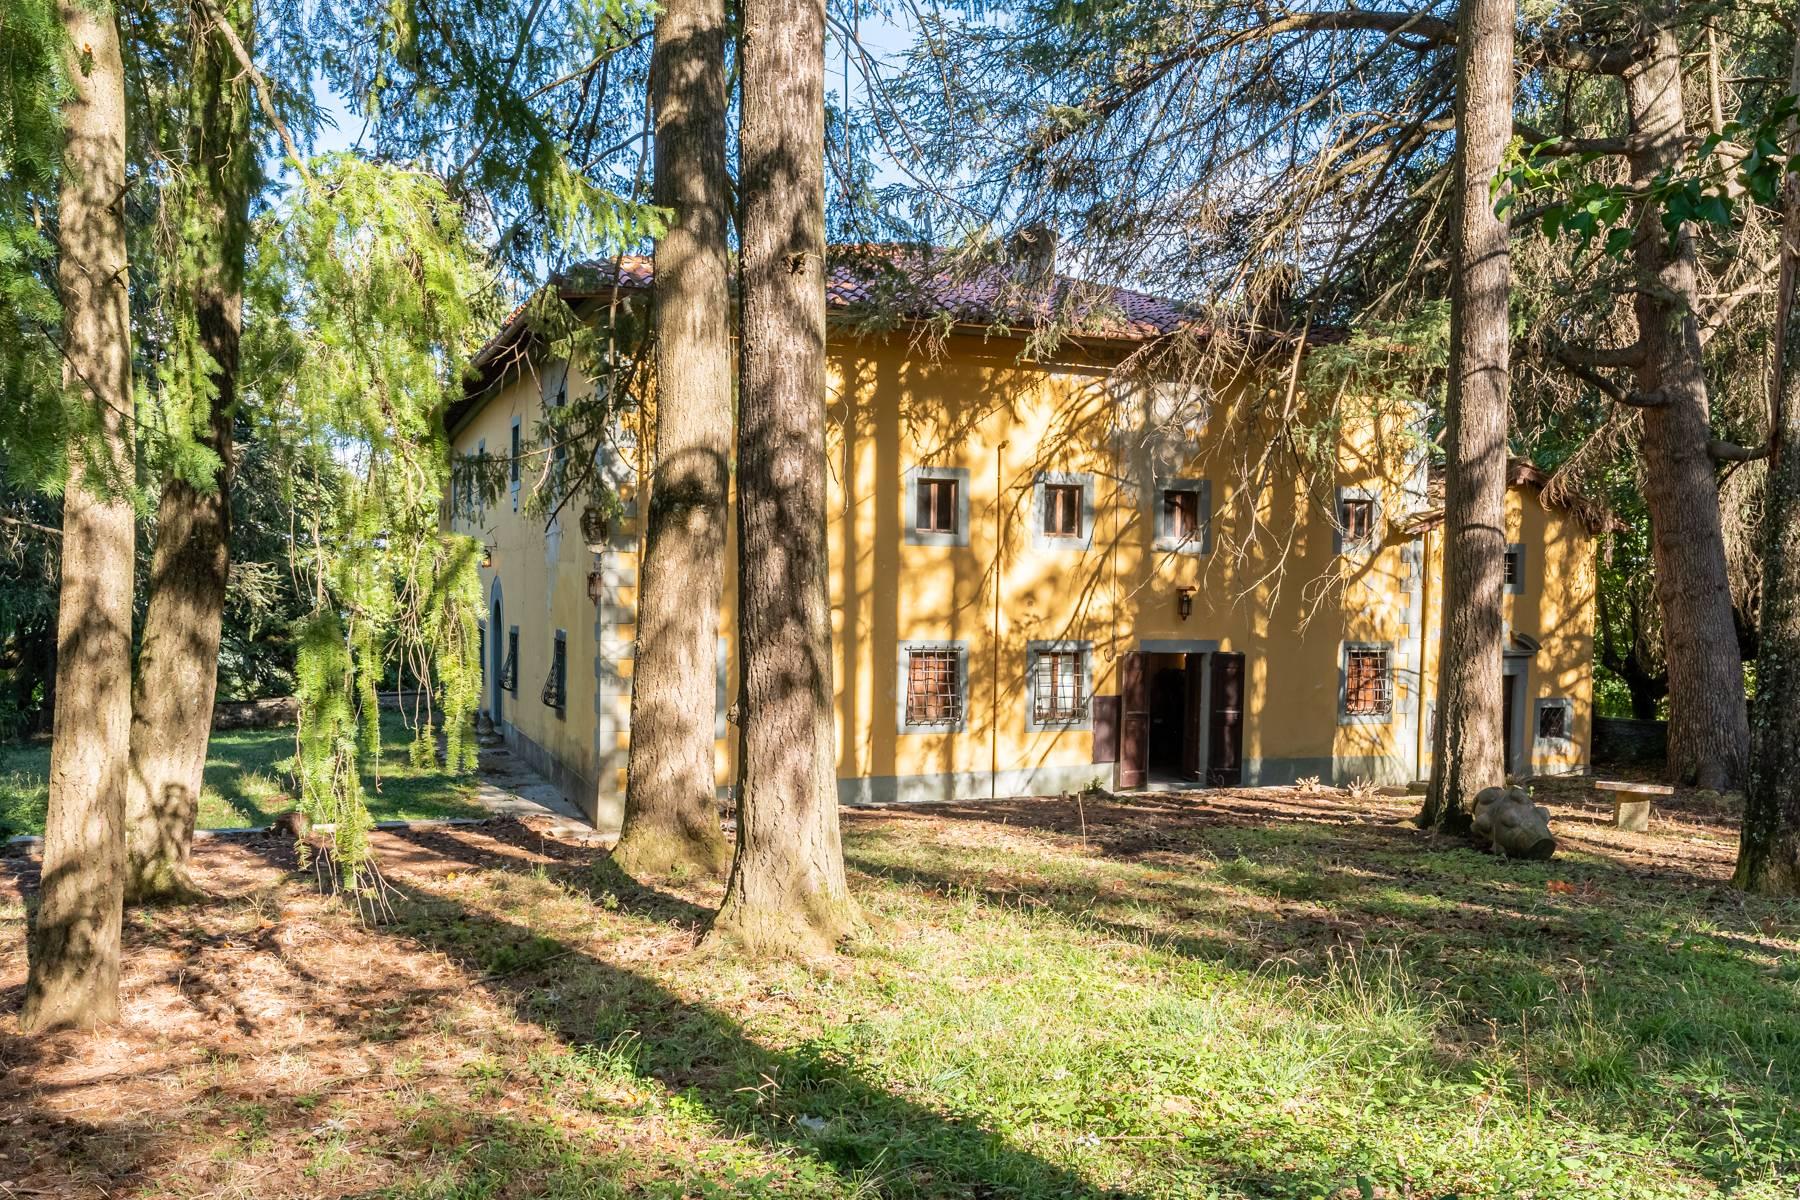 Majestic 16th century villa in the Tuscan countryside - 25